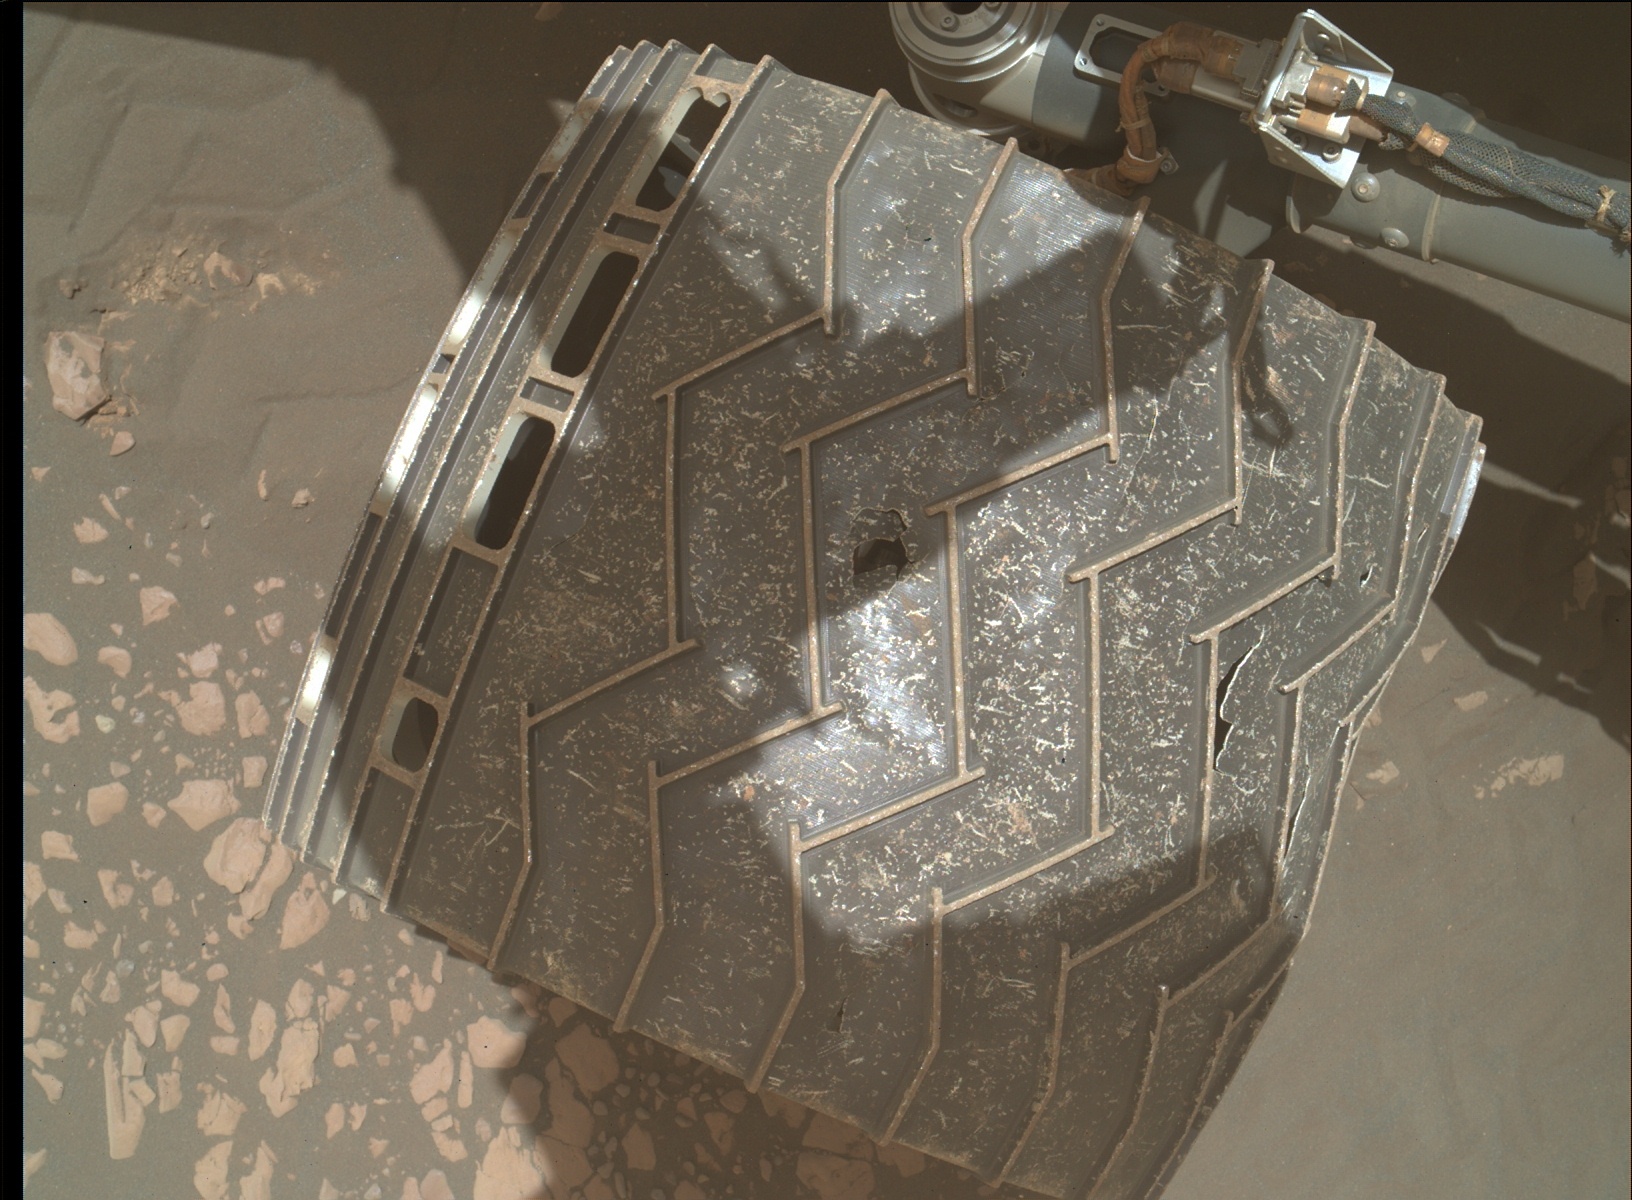 Nasa's Mars rover Curiosity acquired this image using its Mars Hand Lens Imager (MAHLI) on Sol 2407